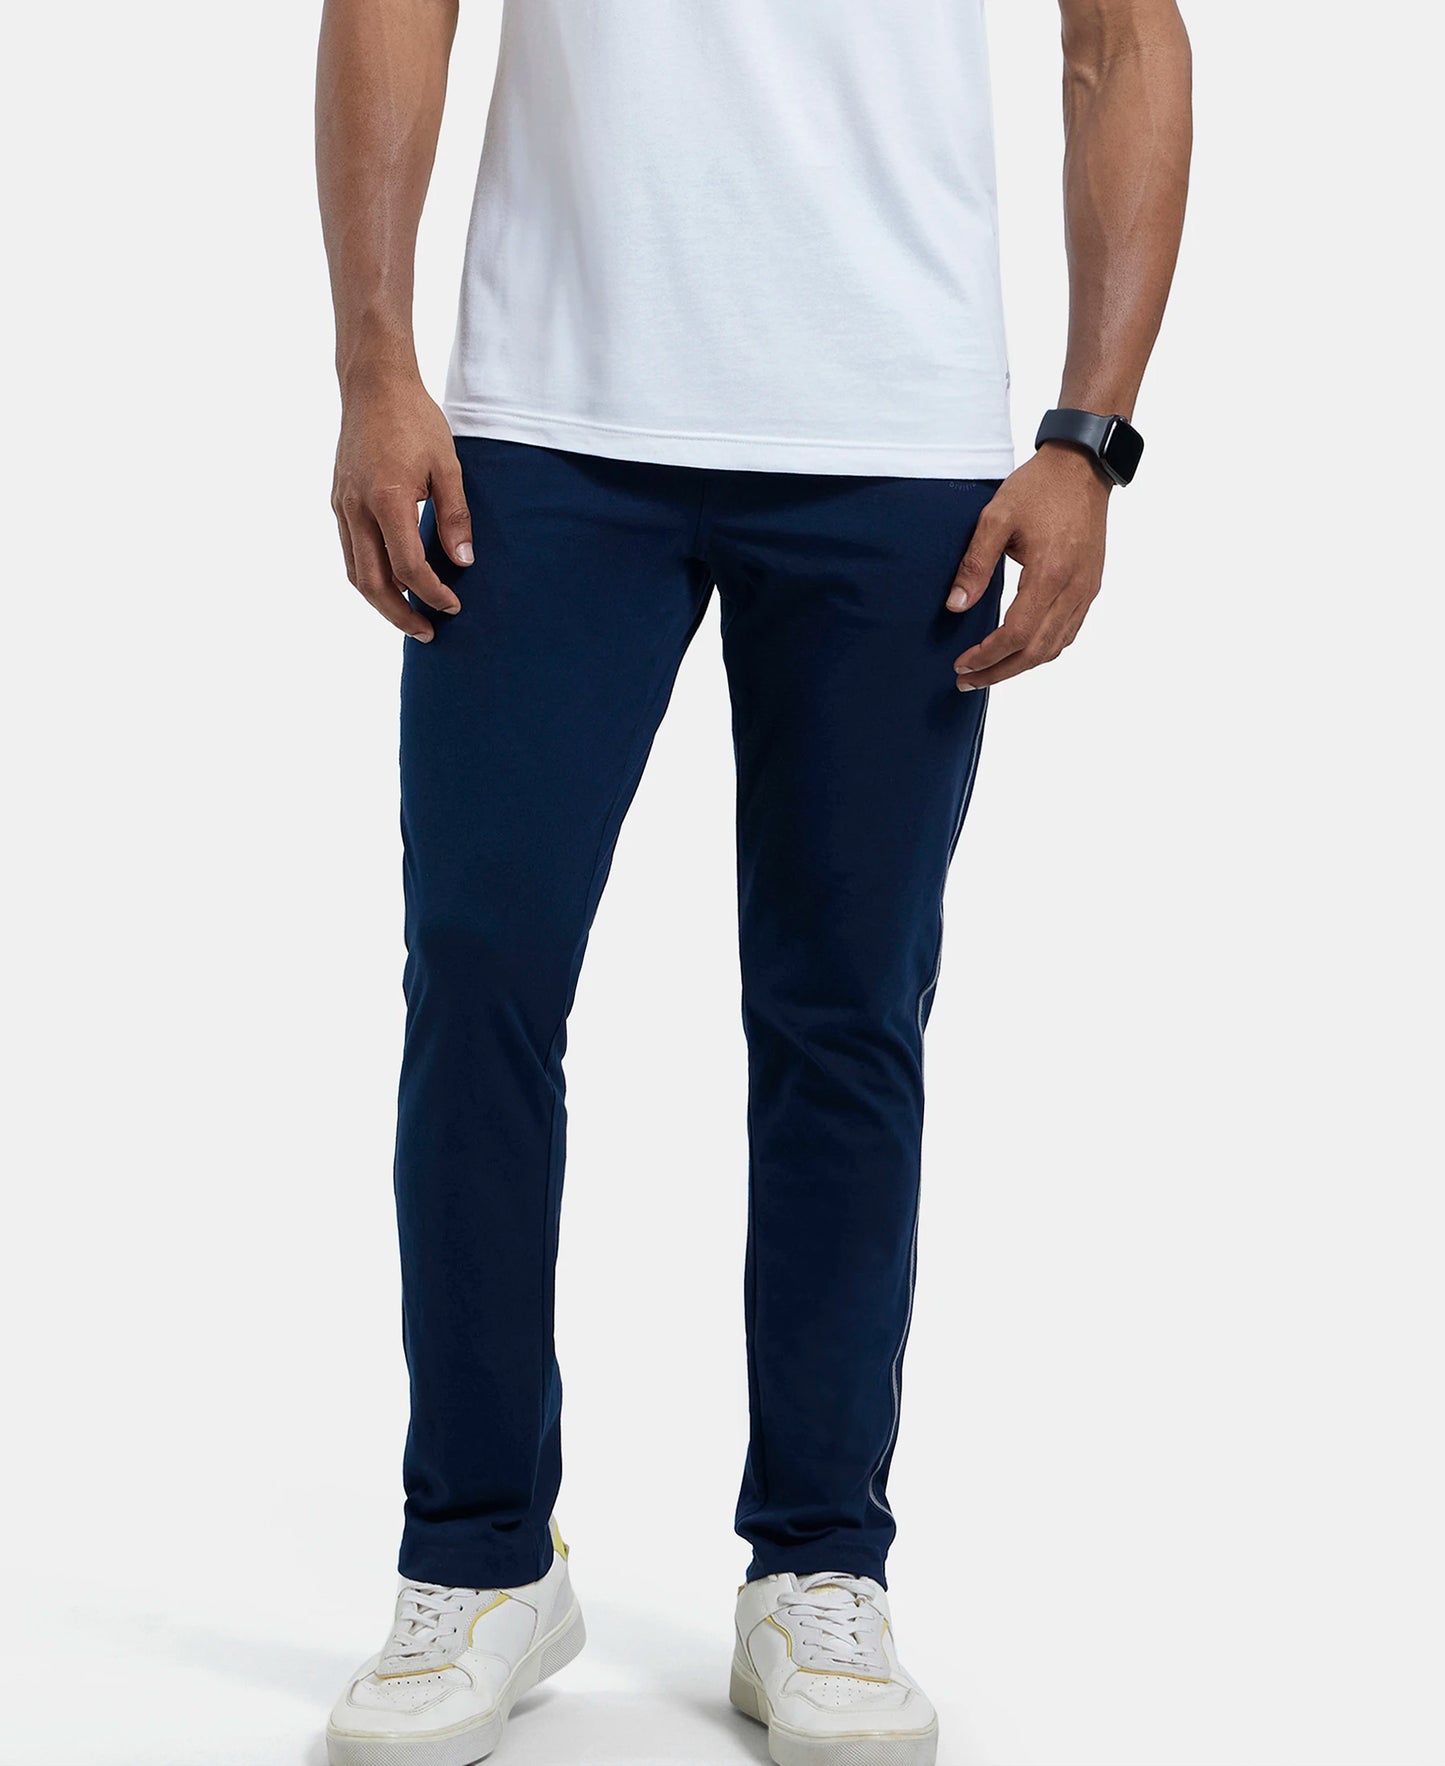 Super Combed Cotton Rich Slim Fit Trackpant with Side and Back Pockets - Navy & Neon Blue-5